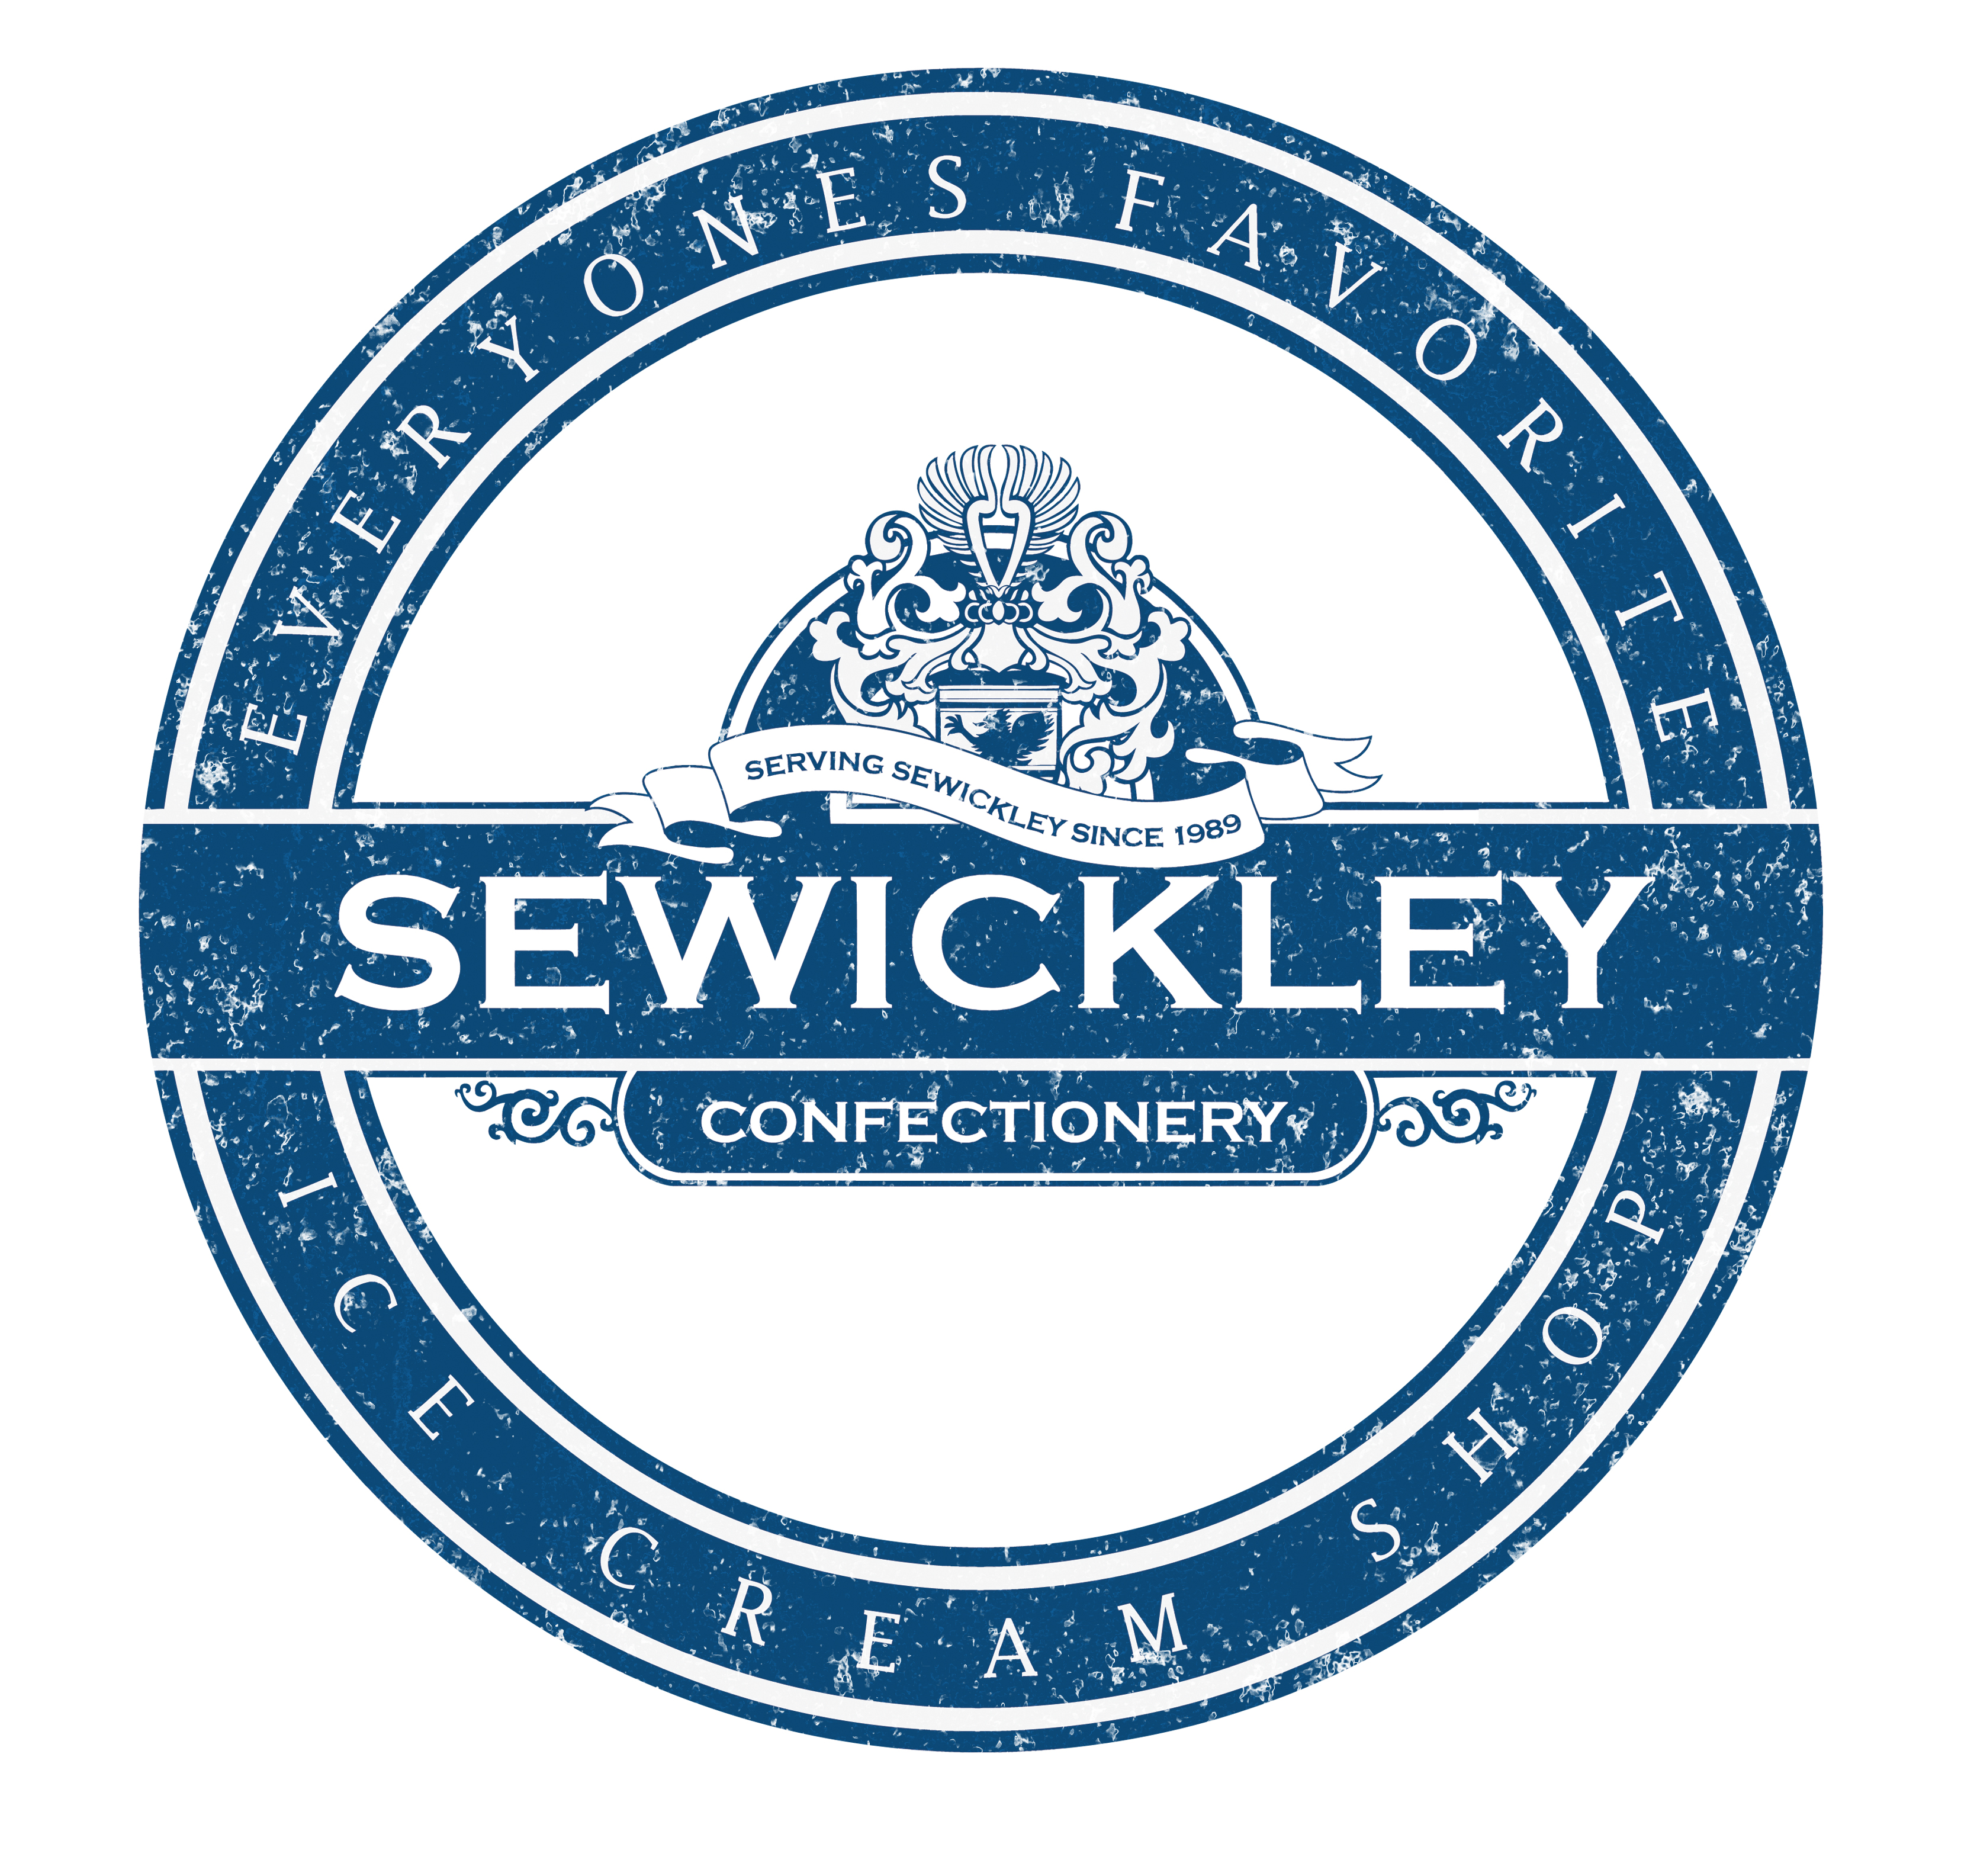 Sewickley Confectionery